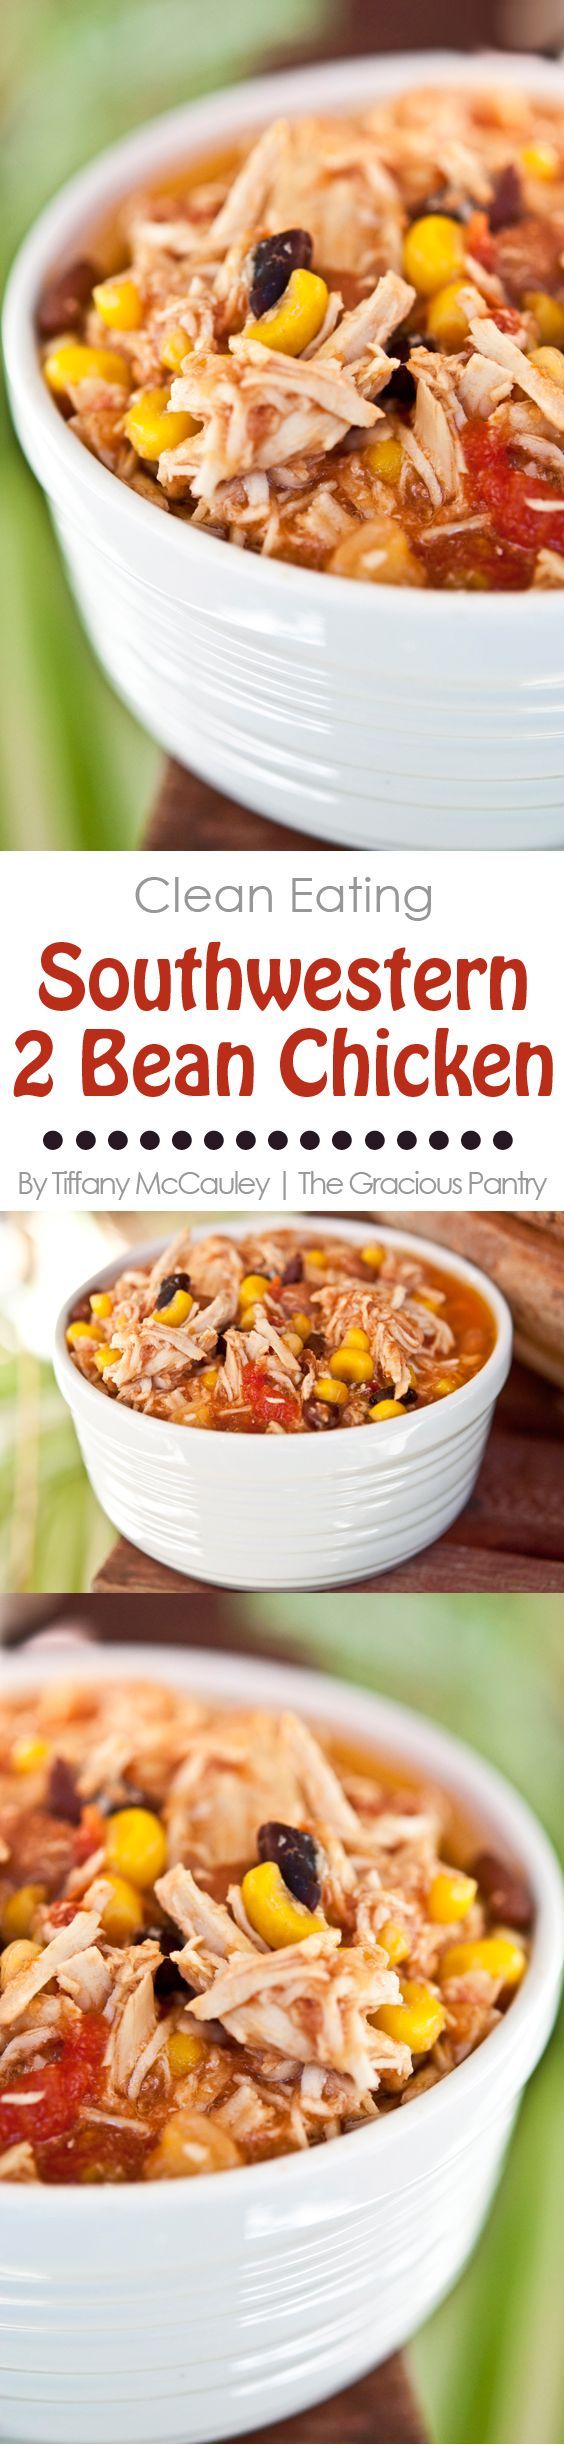 This Clean Eating Slow Cooker Southwestern 2 Bean Chicken is my most popular recip